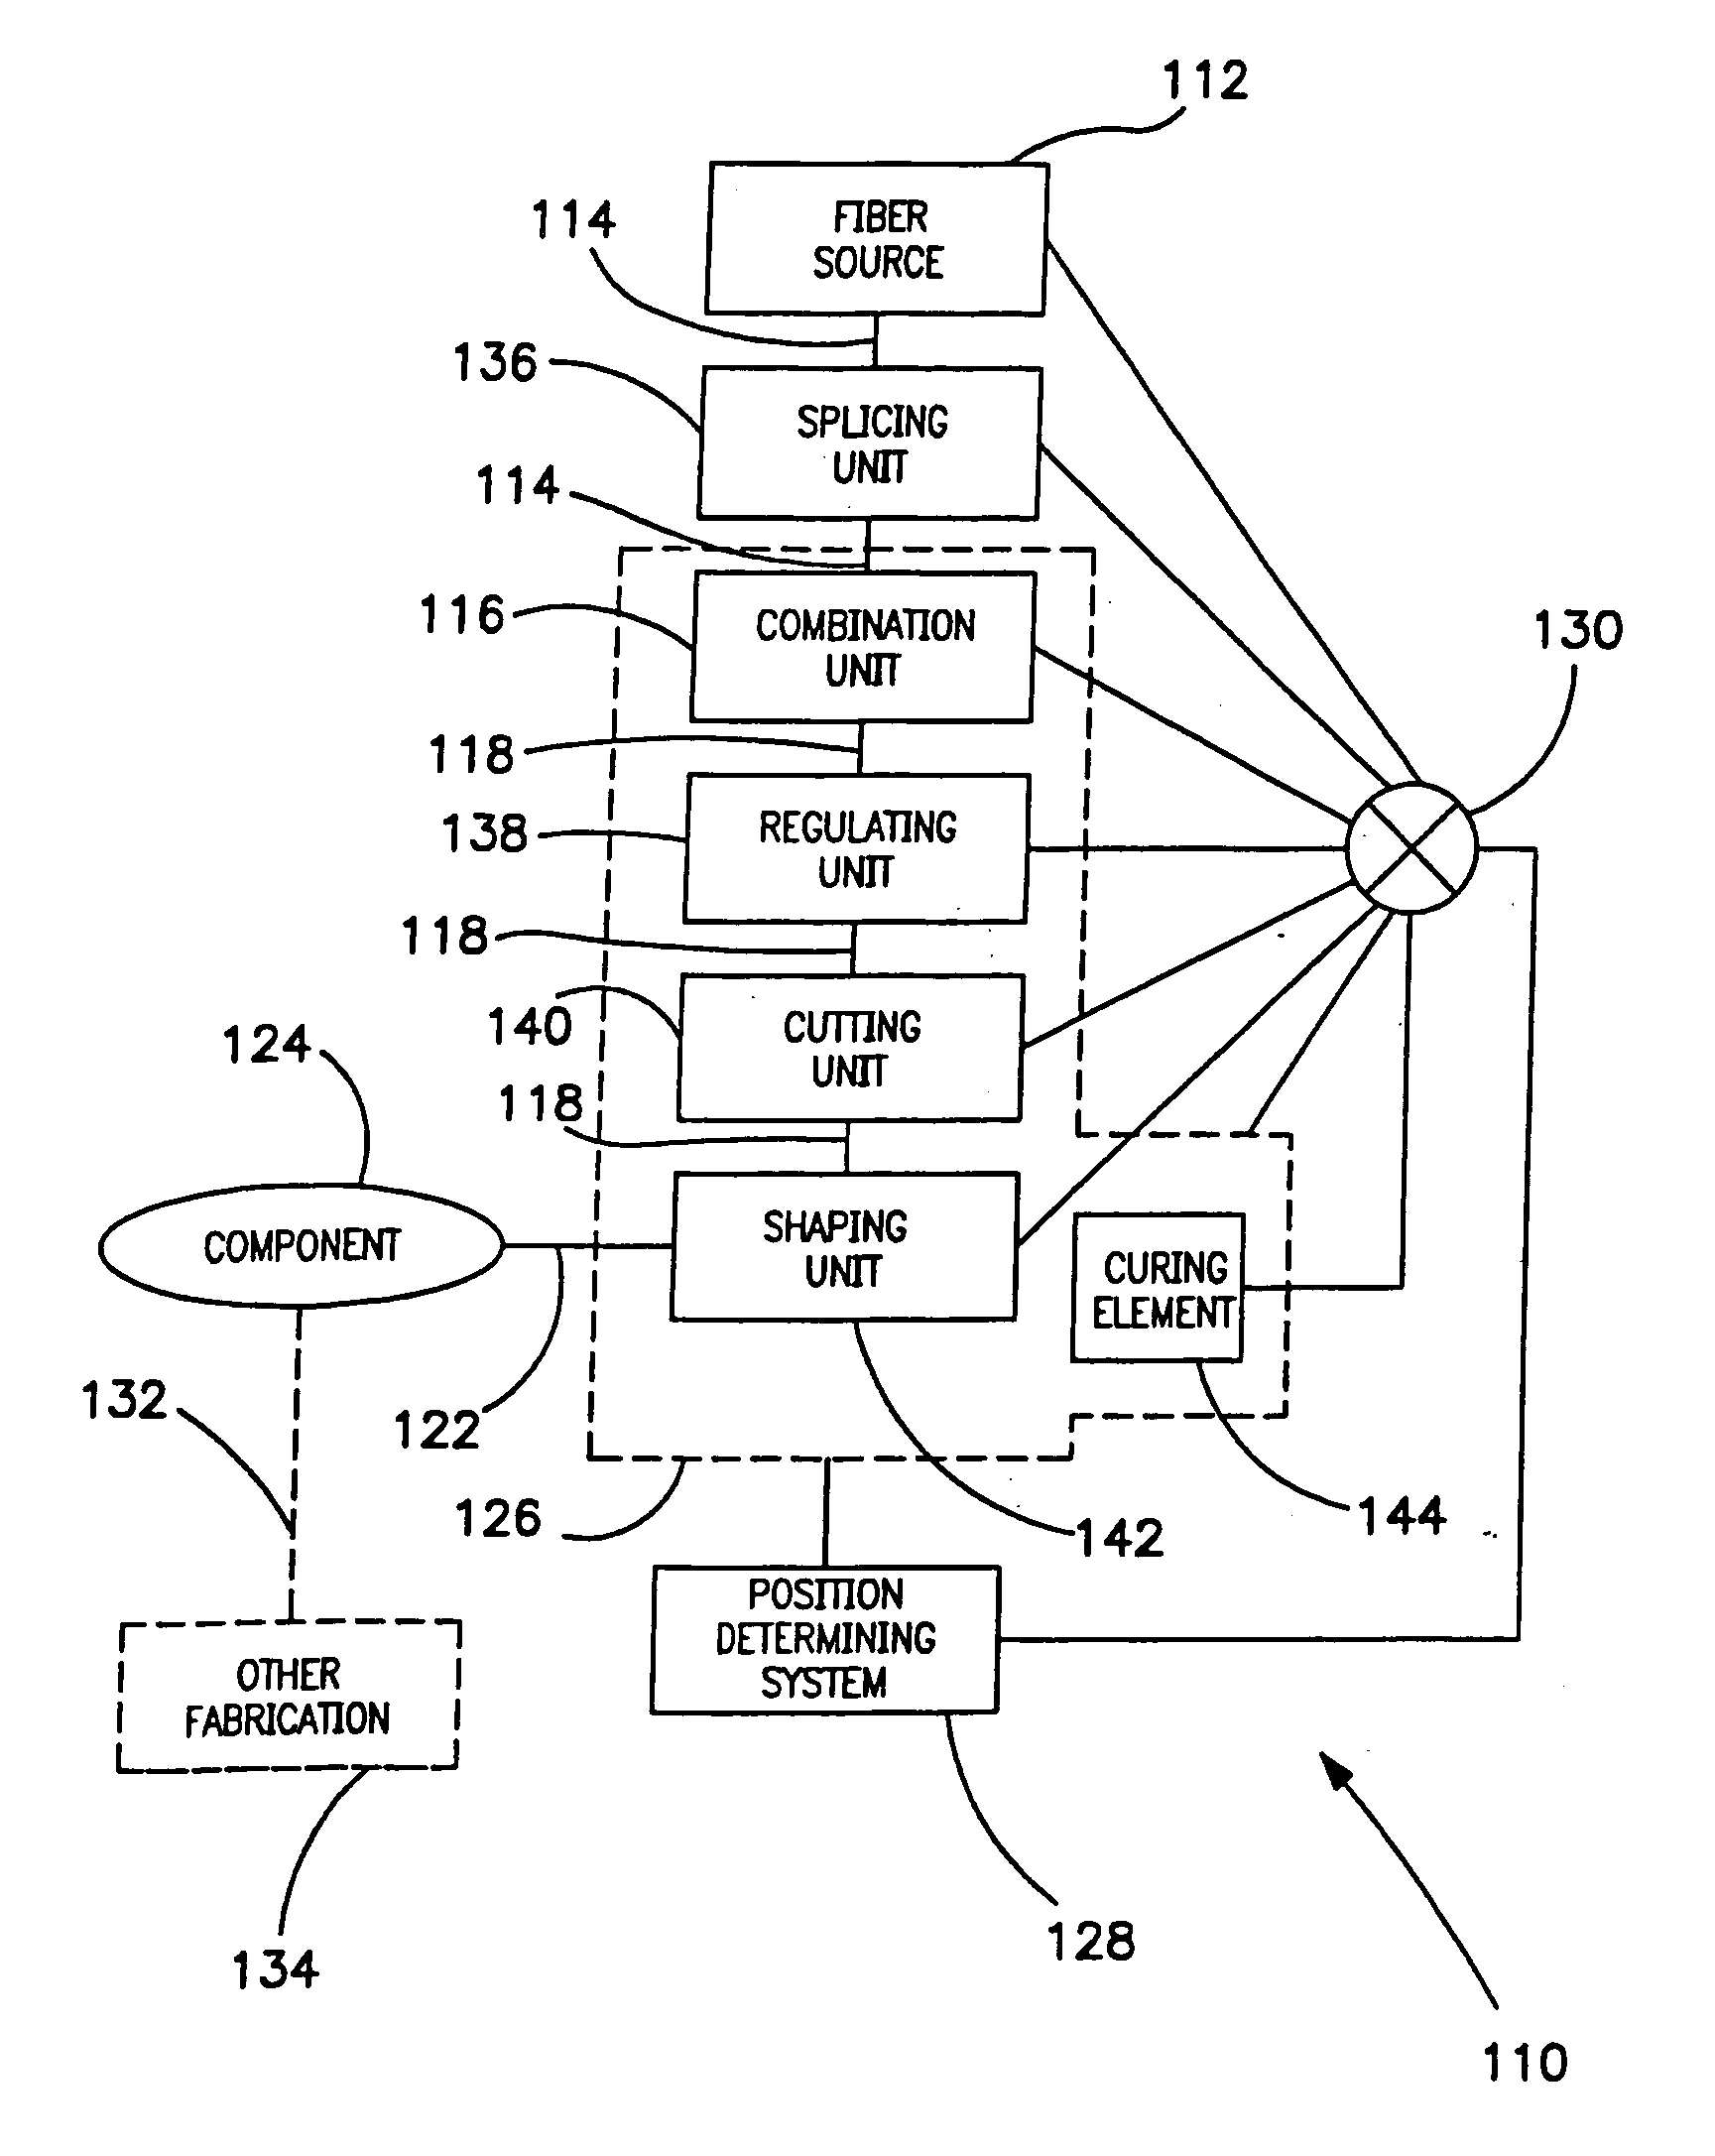 Apparatus and method for manufacture and use of composite fiber components